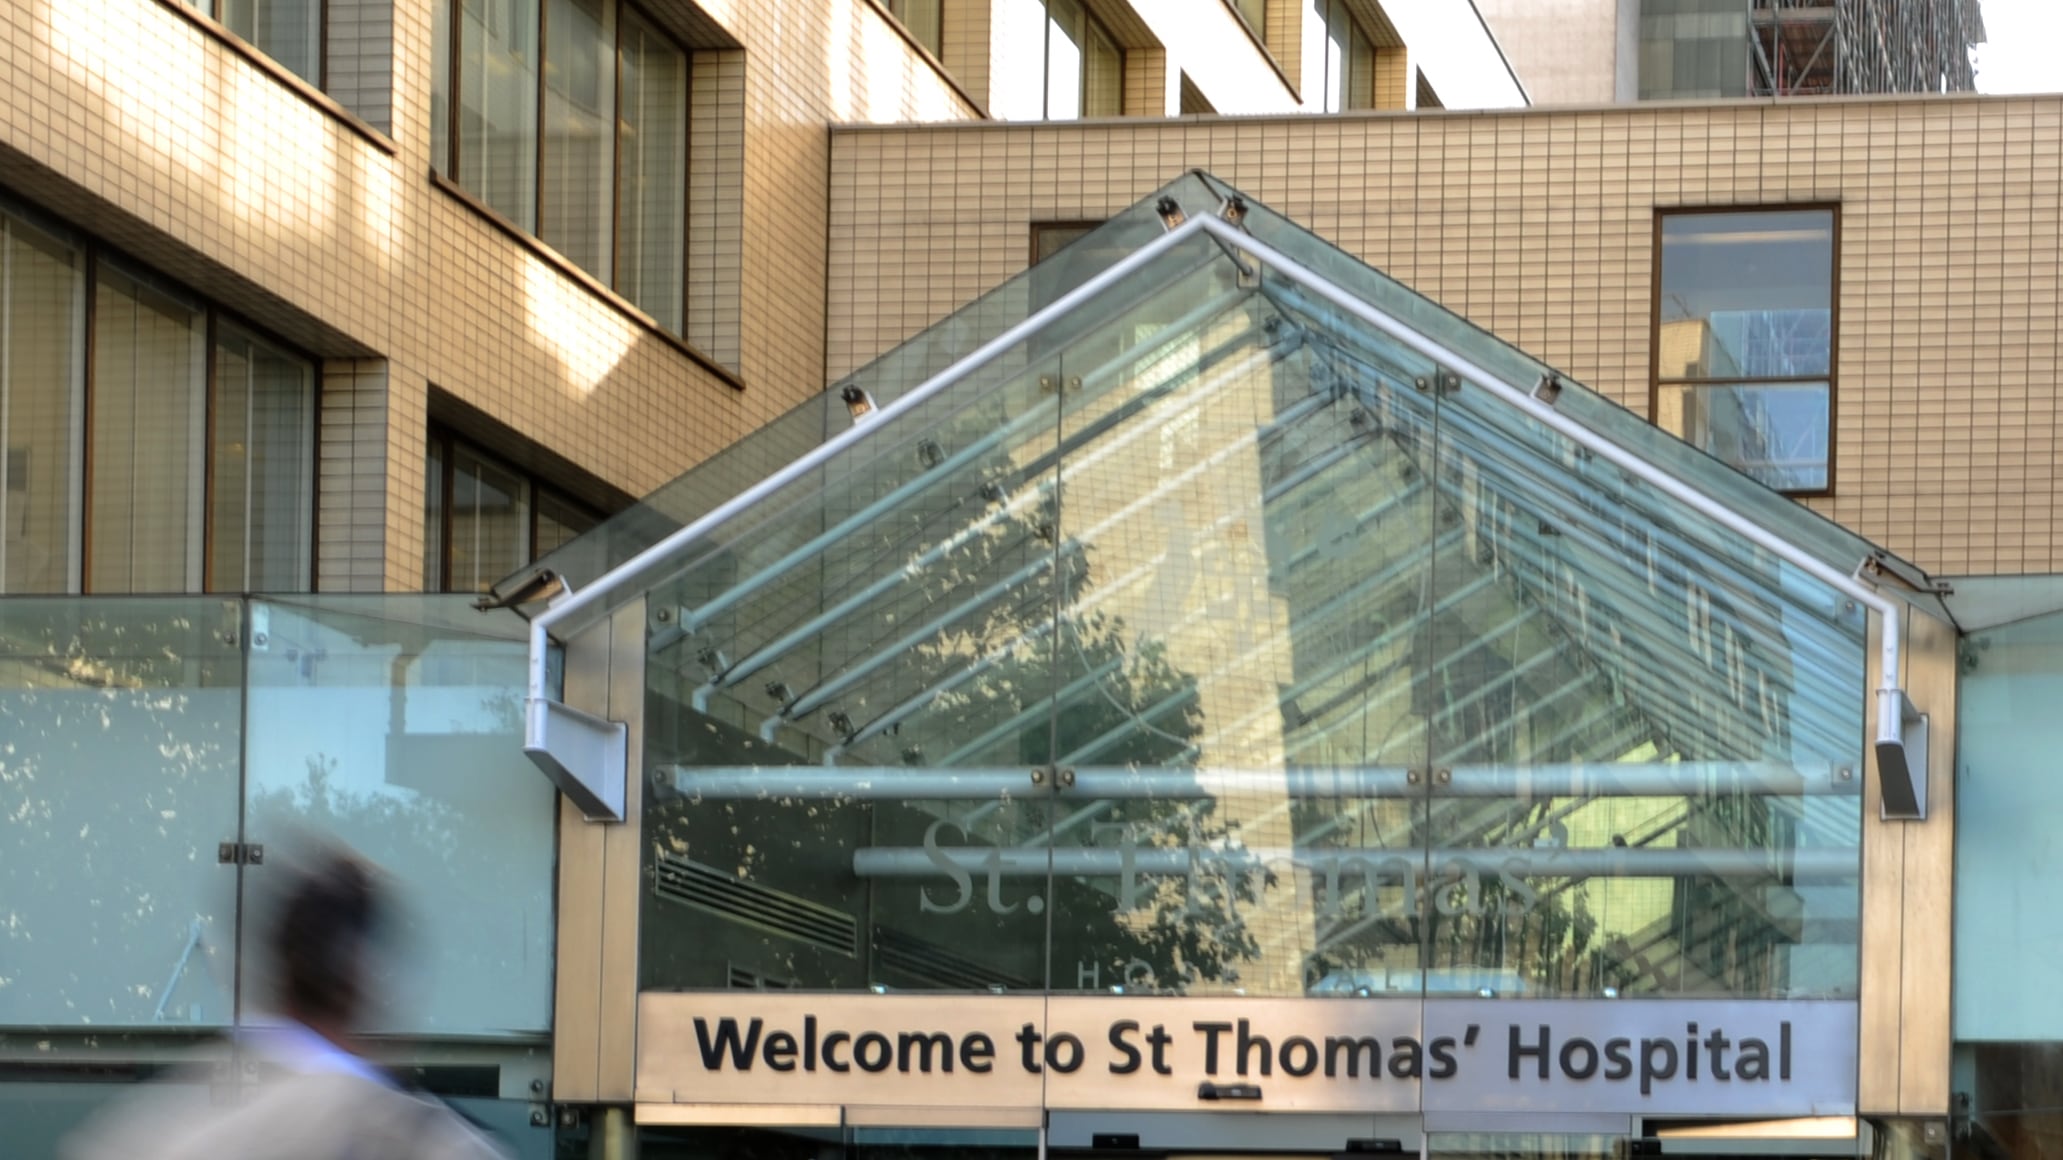 The front entrance of St Thomas’ Hospital